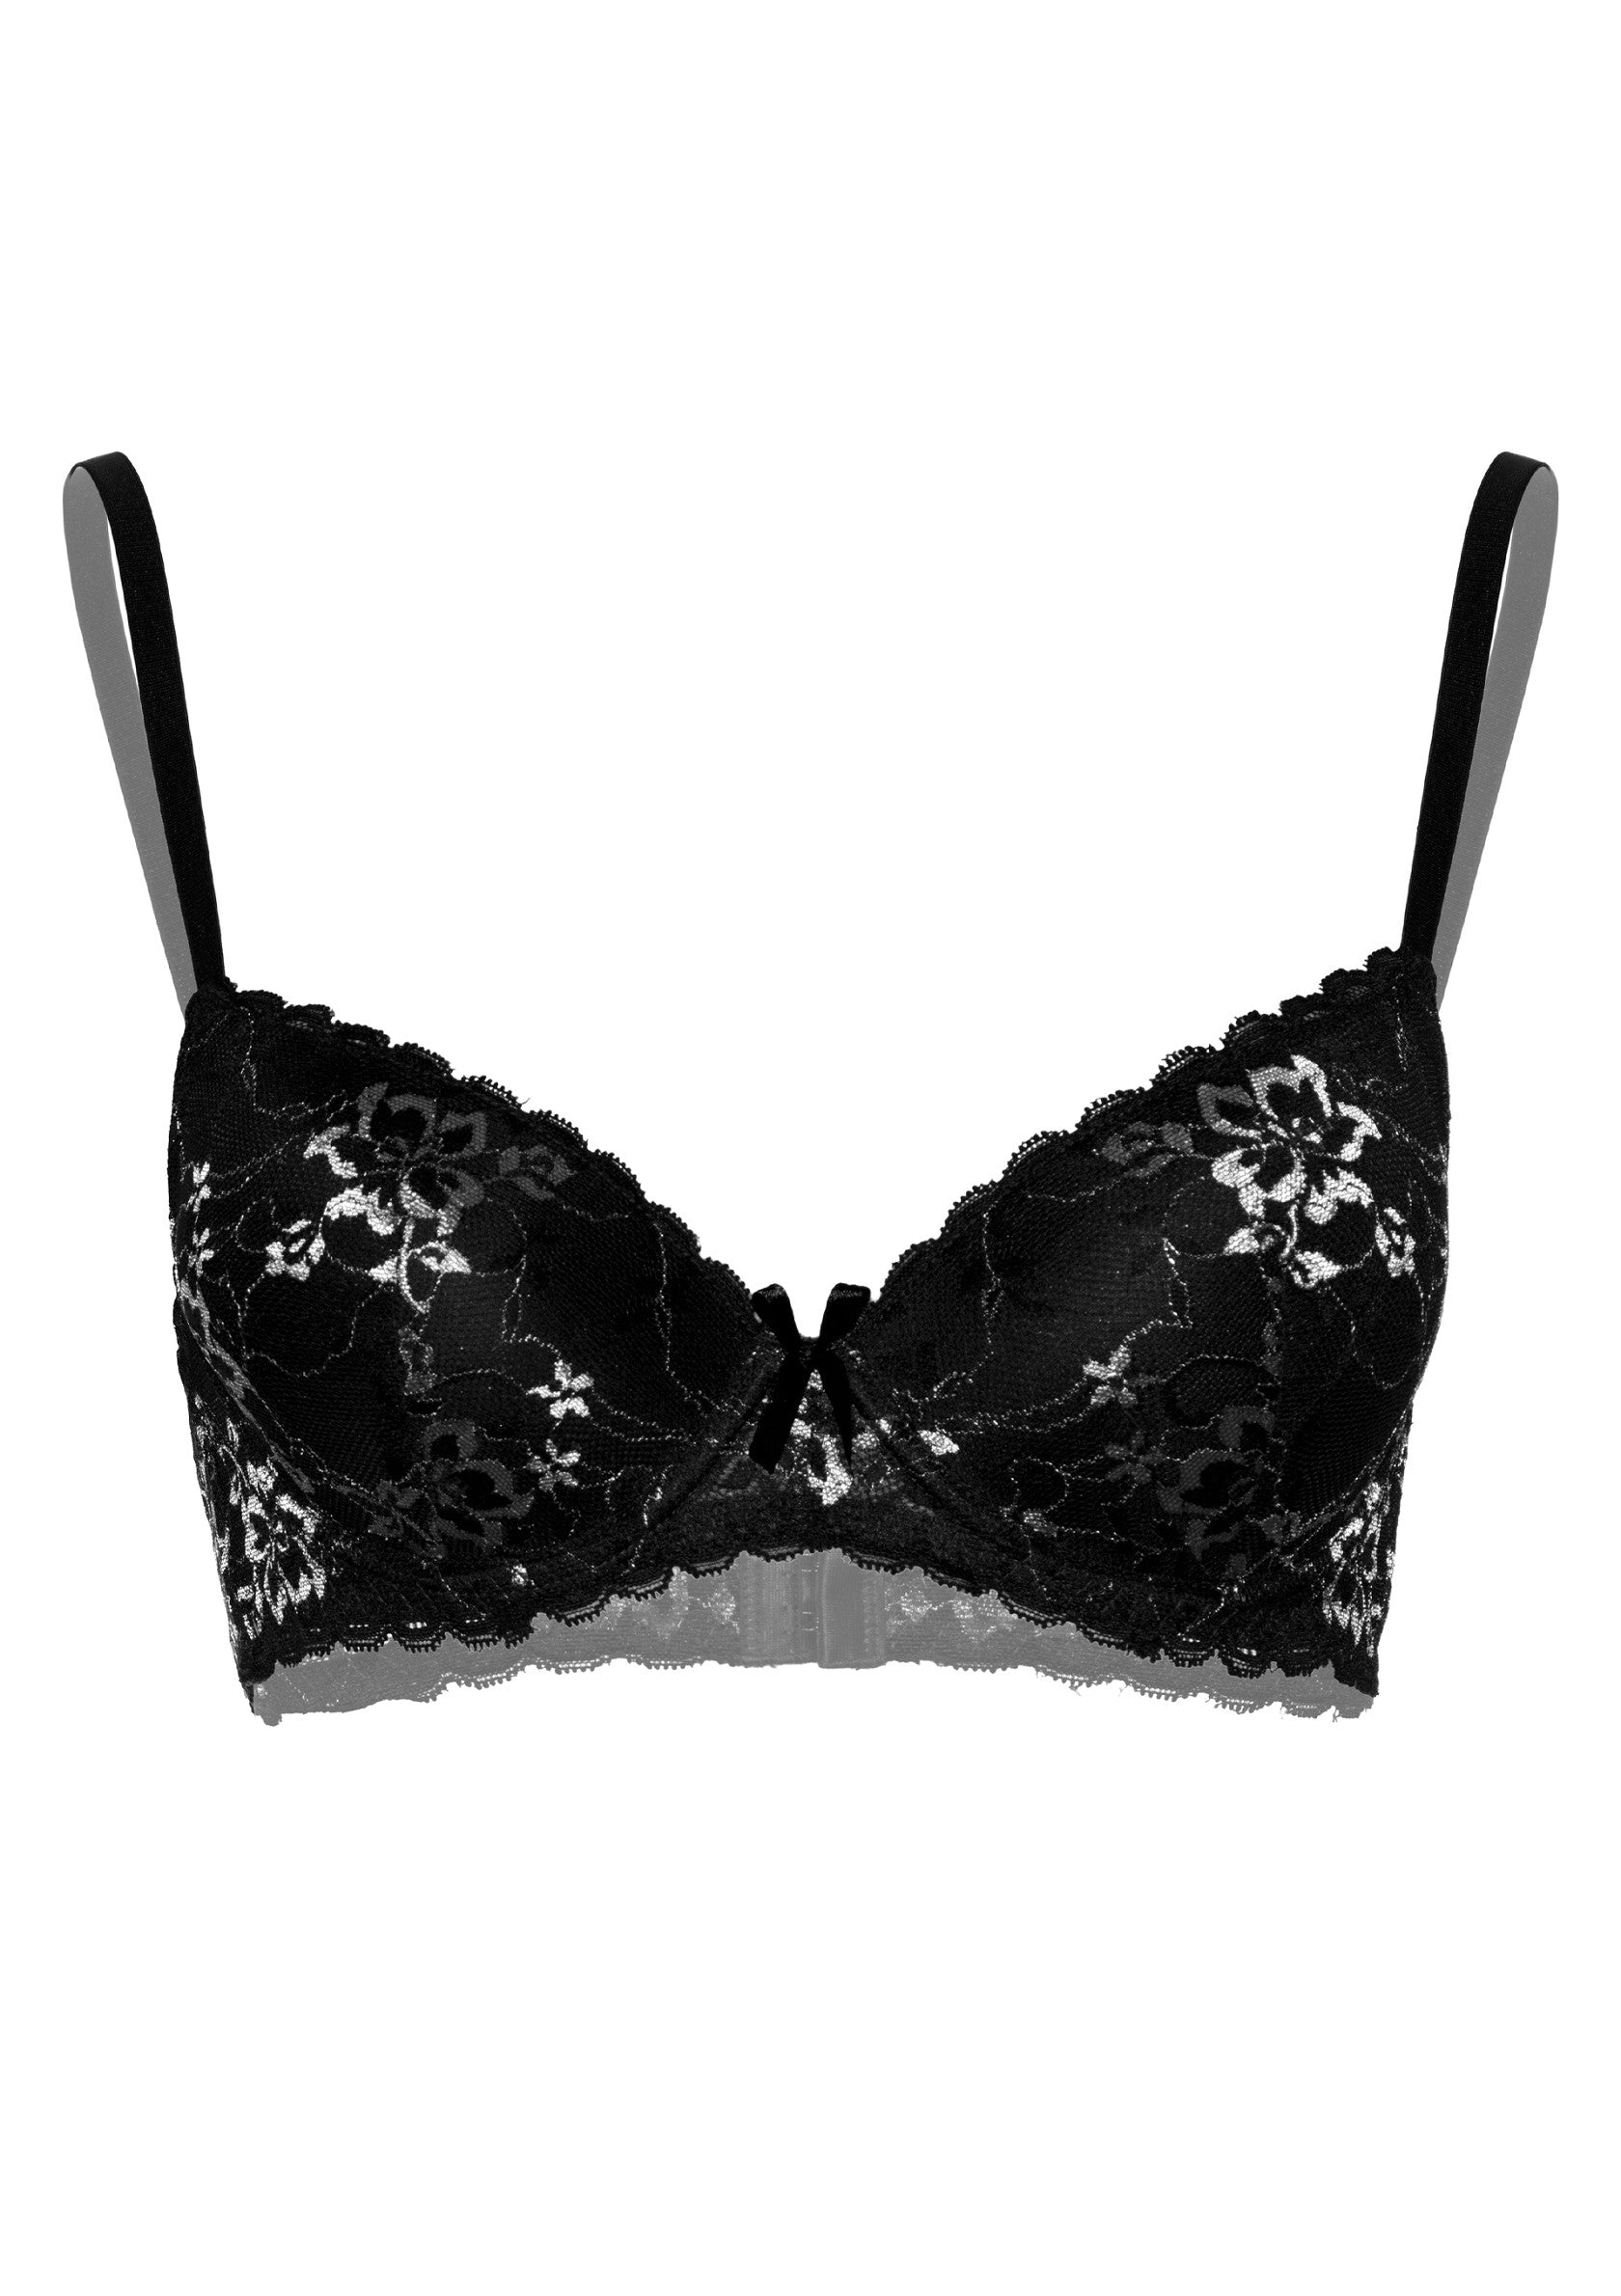 Daring Intimates Mix & Match Demi bra with floral lace BLACK 75B - 4